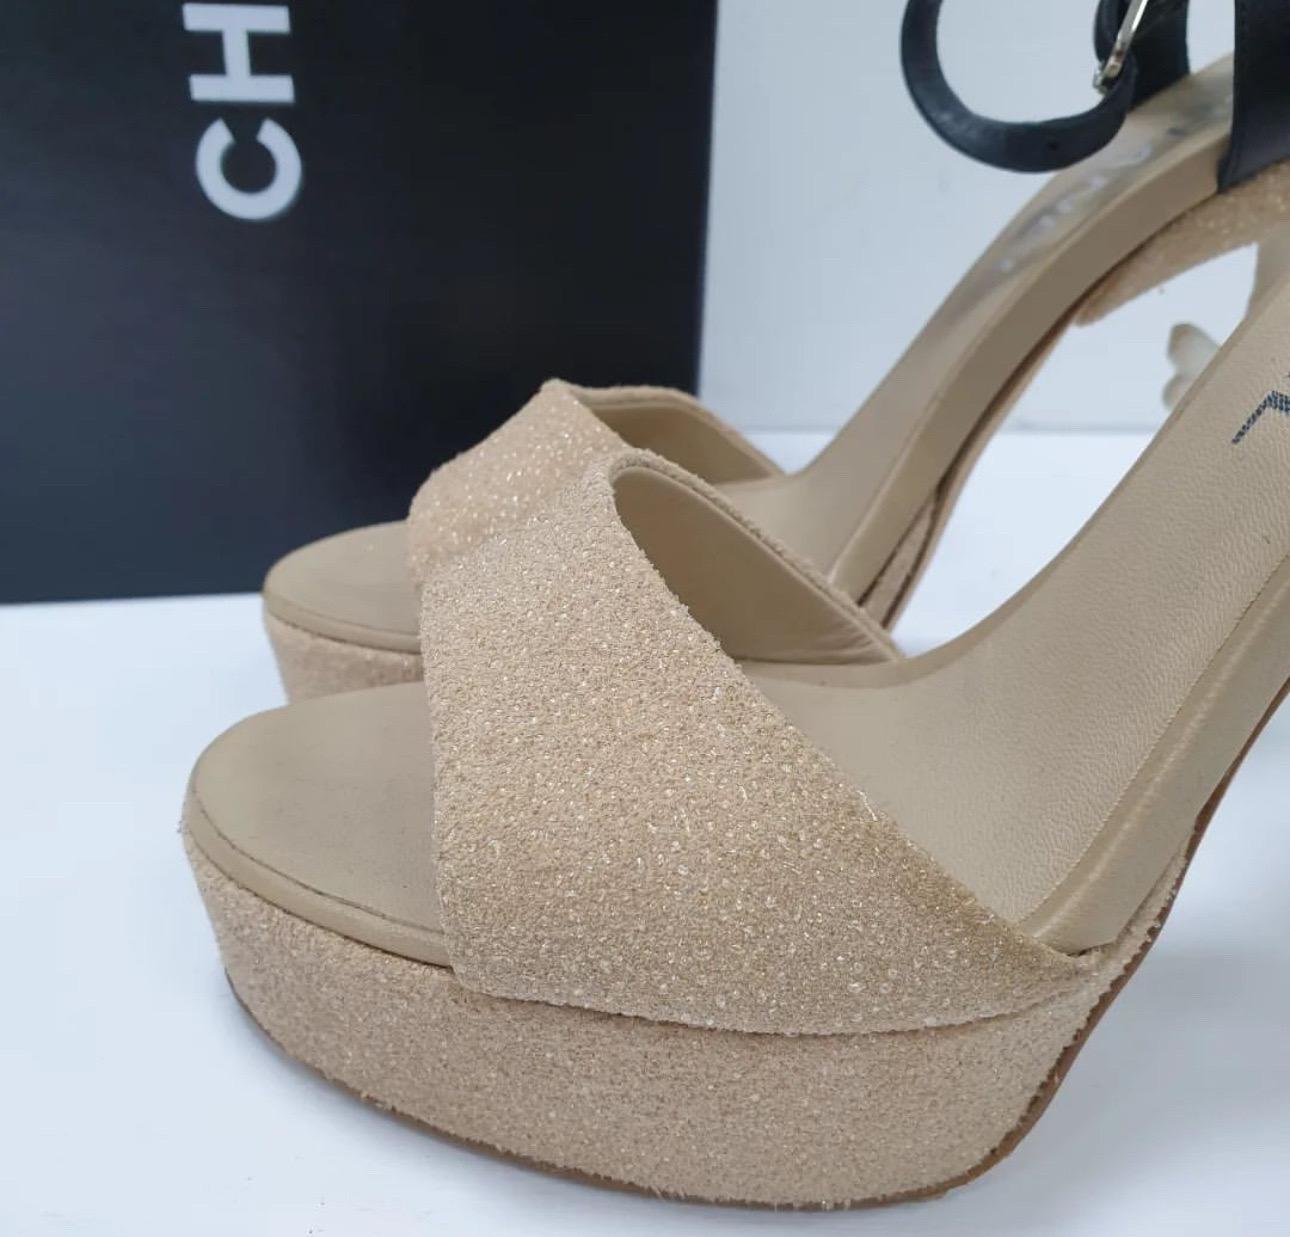 CHANEL 2012 Beige Sand Coral Heels Sandals In Good Condition For Sale In Krakow, PL